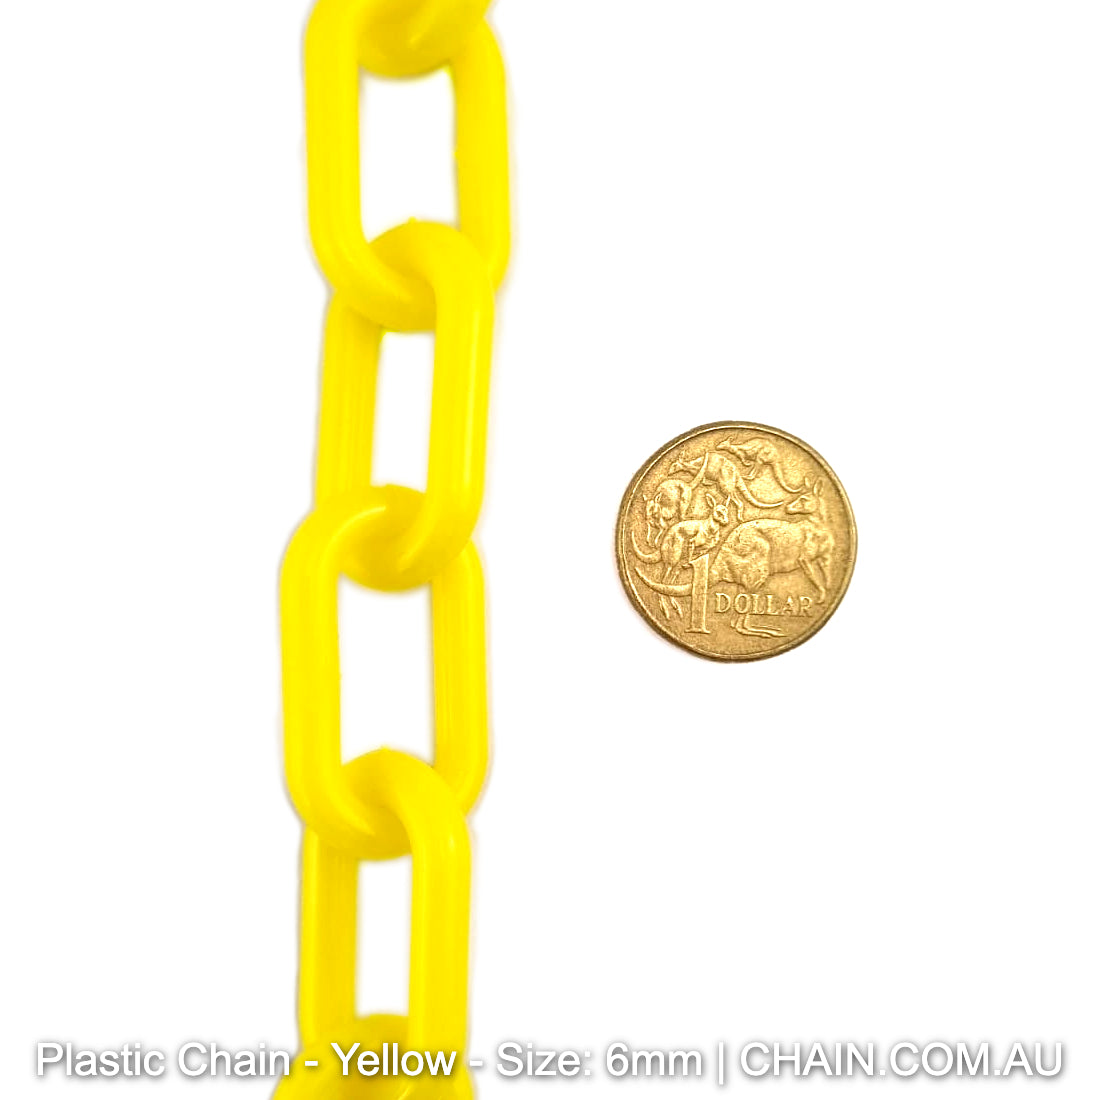 Yellow Plastic Chain, size: 6mm. Chain by the metre or bulk buy larger reels. Australia wide shipping + Melbourne pick up. Shop: Chain.com.au